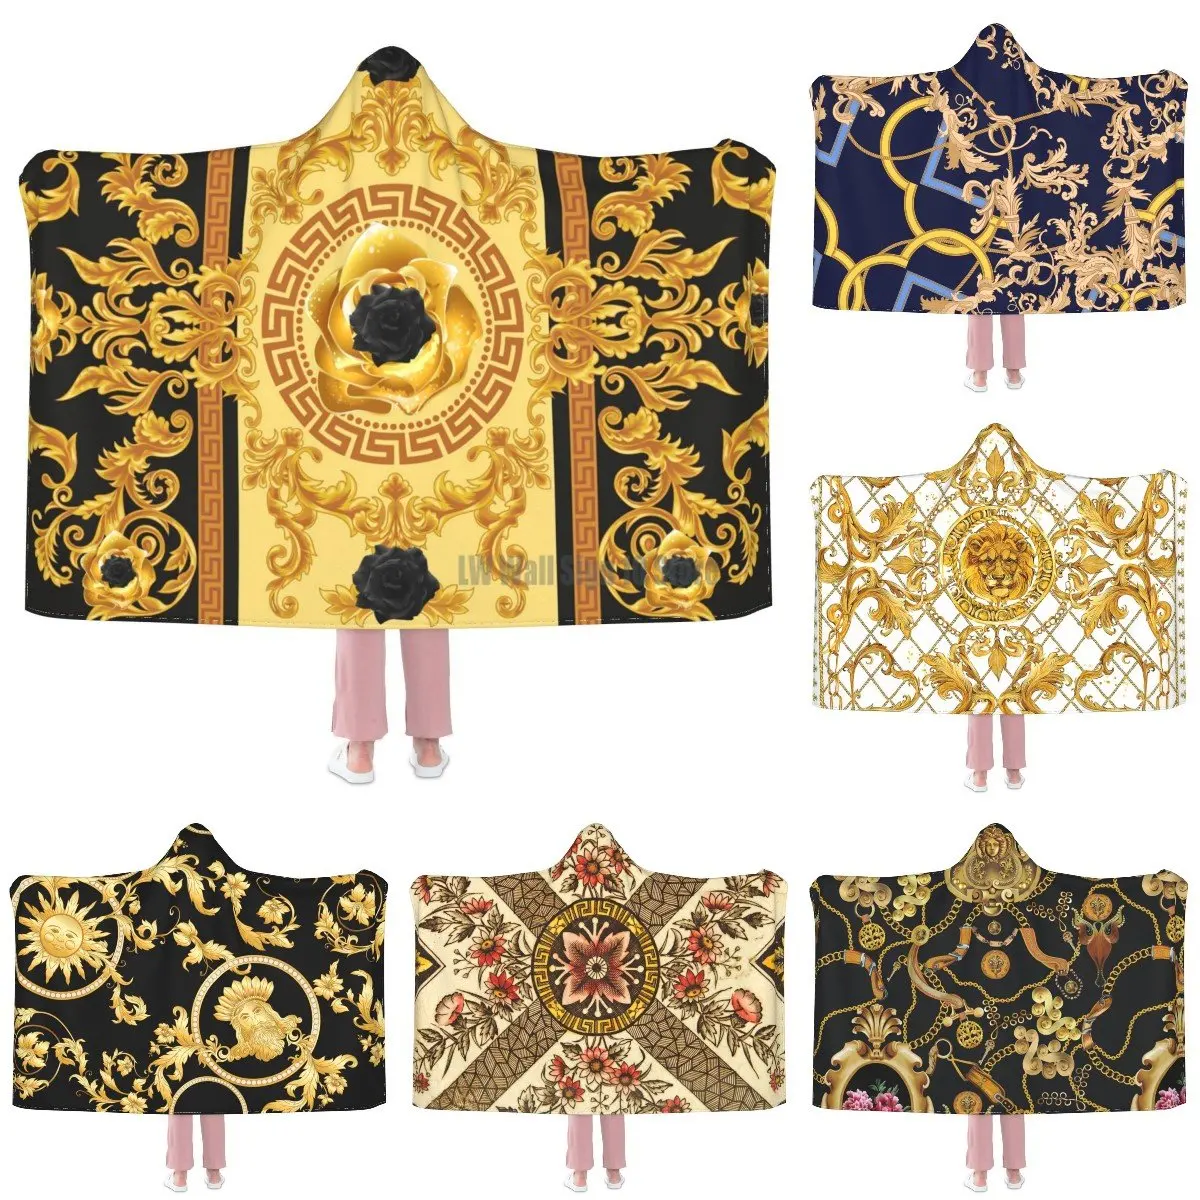 

Yellow Rose And Bees Vintage Kitsch Baroque Scarves Wearable Hooded Blanket Flannel Fleece Throw Blanket Cape Cloak Wearable